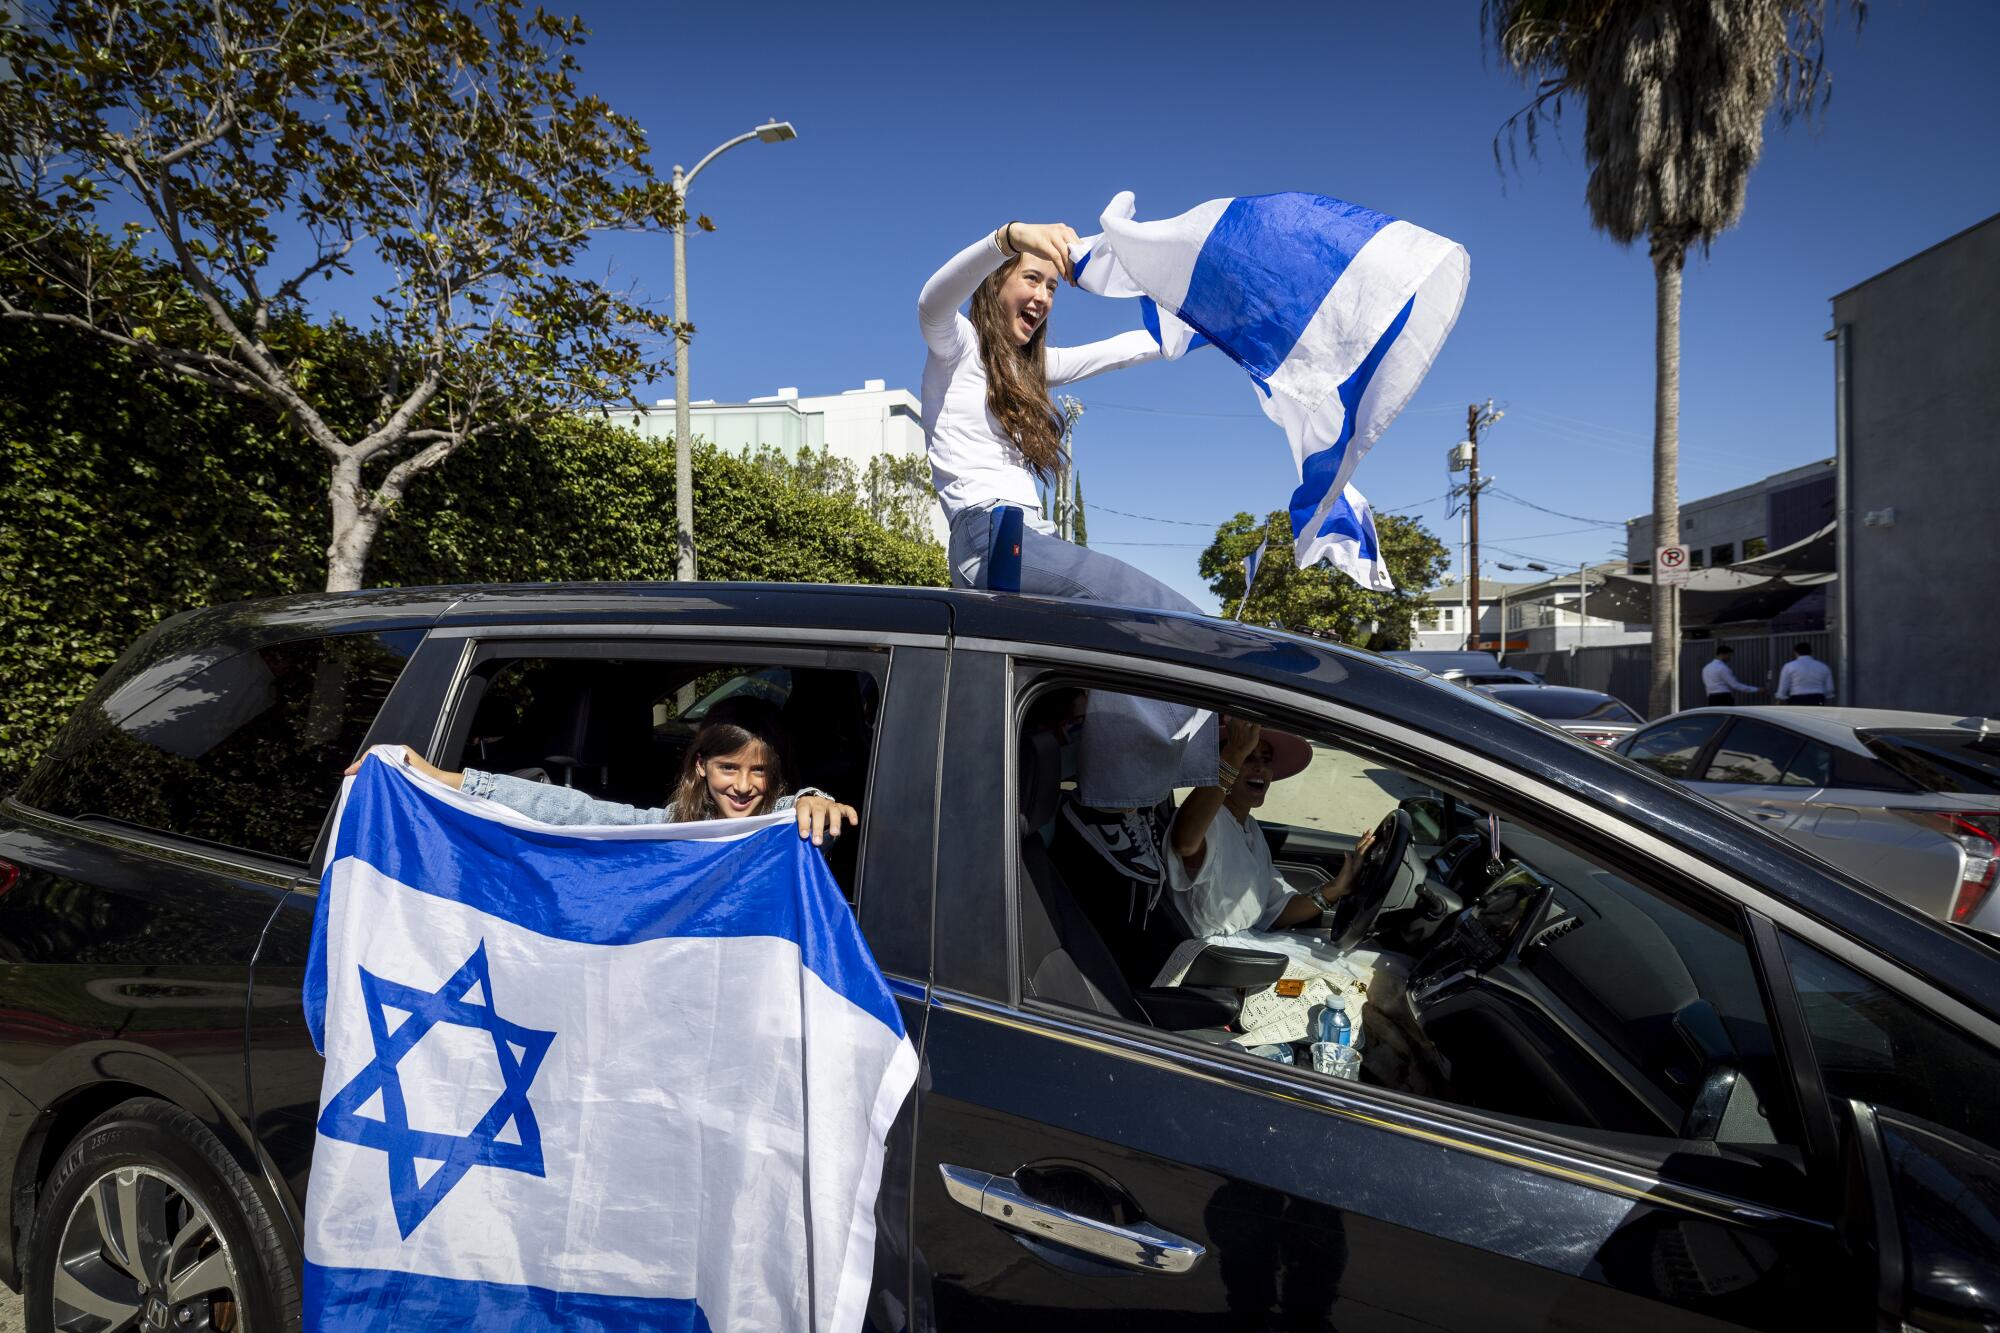 People display Israeli flags from their car while watching thousands marching to the Museum of Tolerance in Los Angeles.